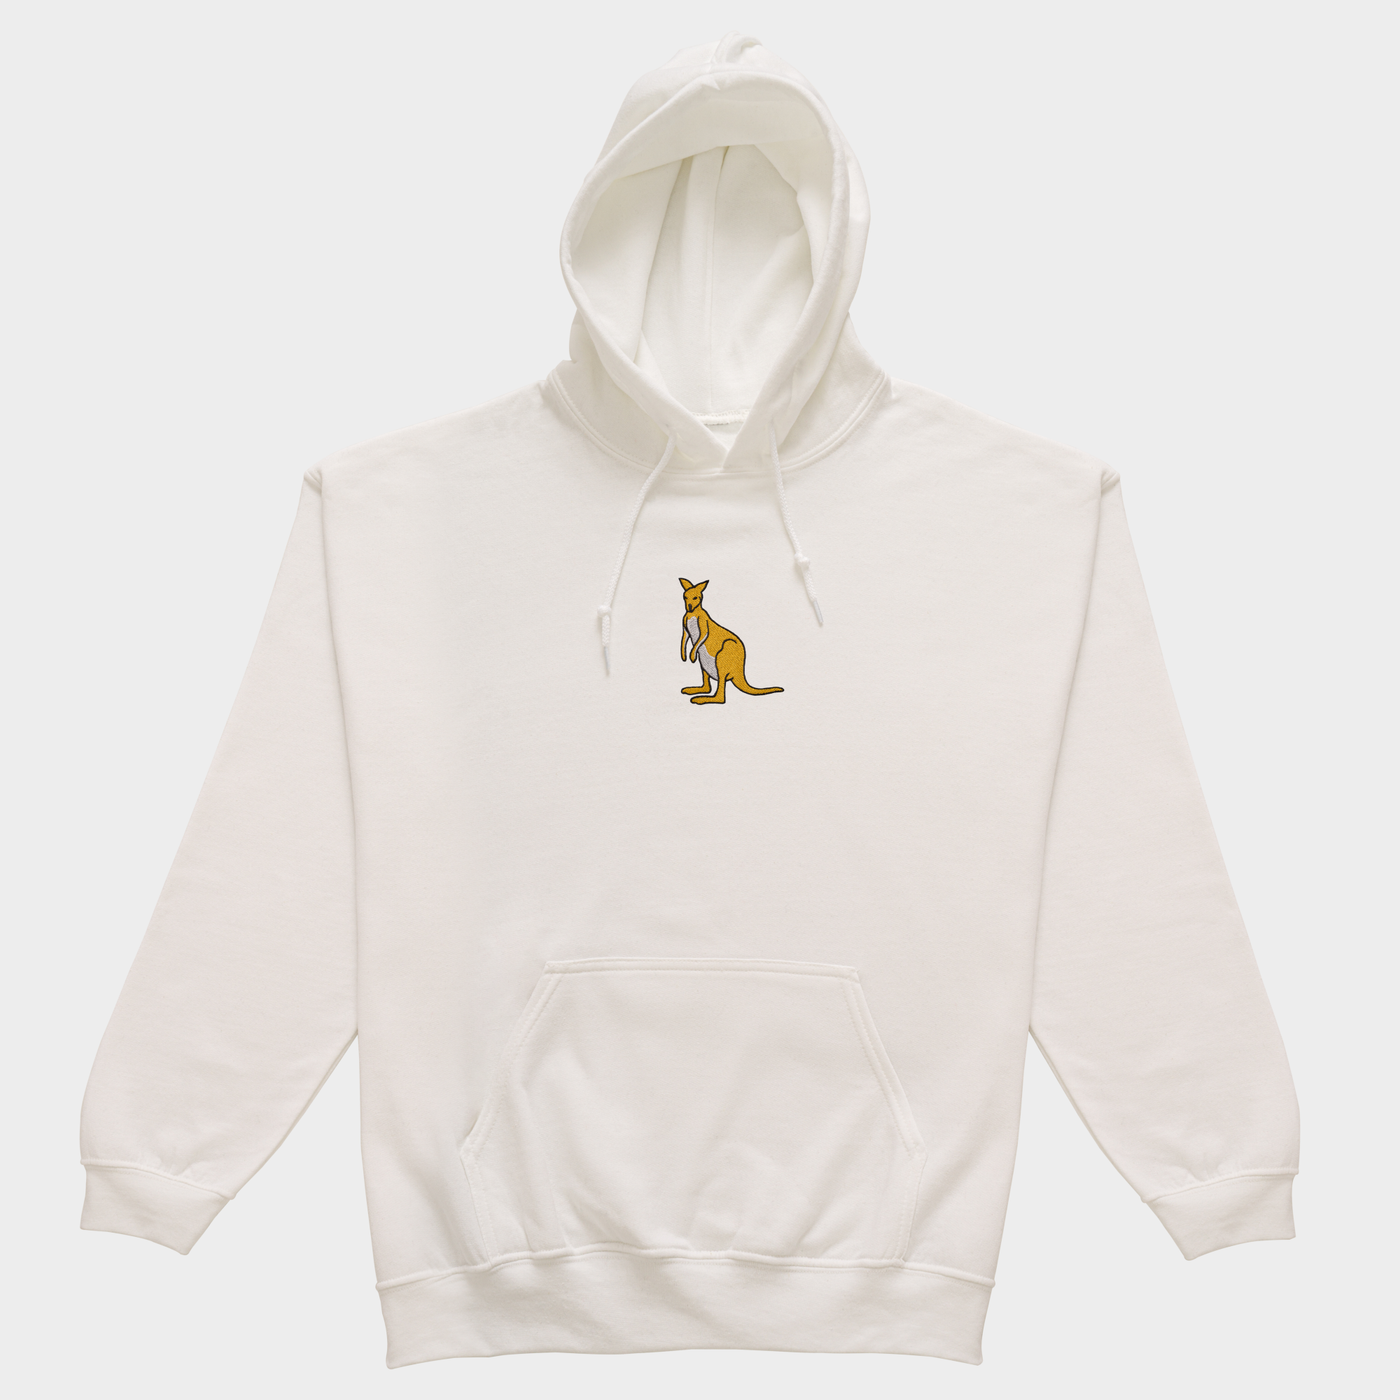 Bobby's Planet Women's Embroidered Kangaroo Hoodie from Australia Down Under Animals Collection in White Color#color_white